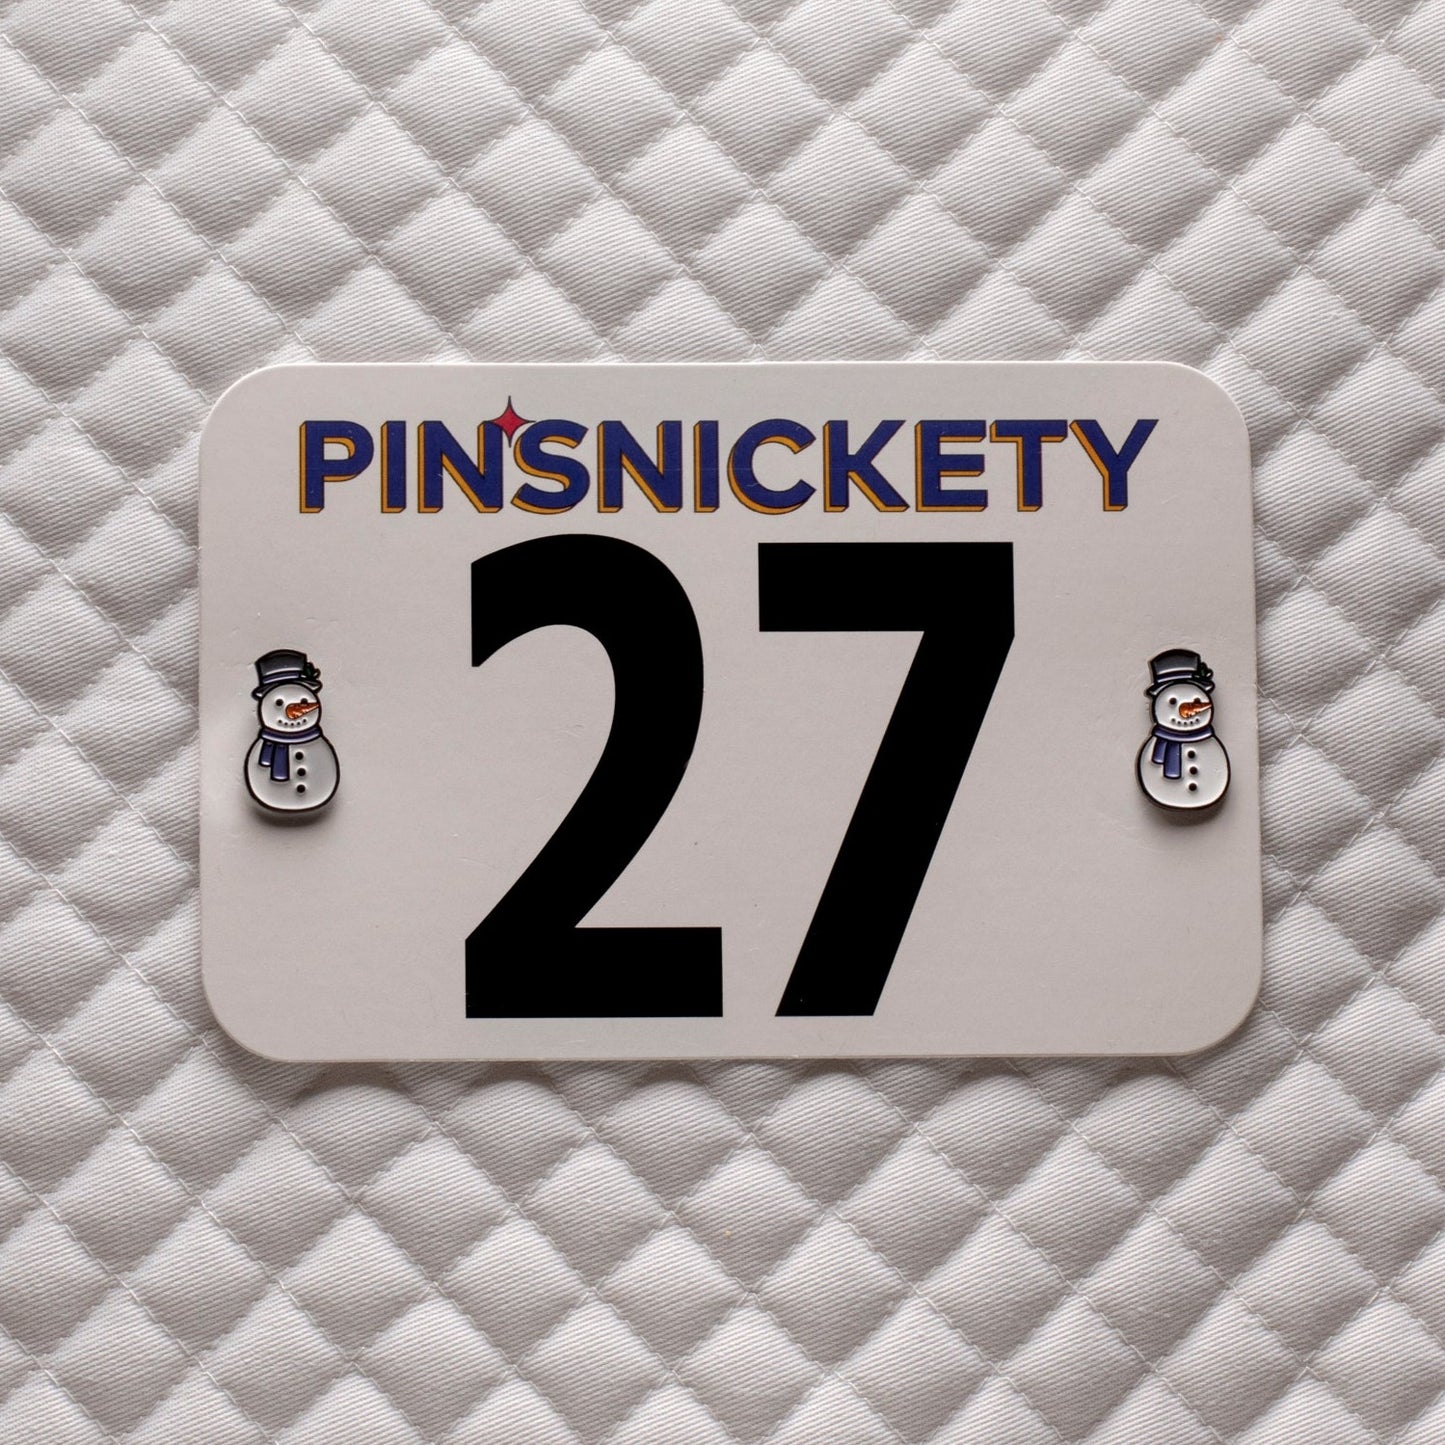 pinsnickety snowman horse show number pins on a saddle pad